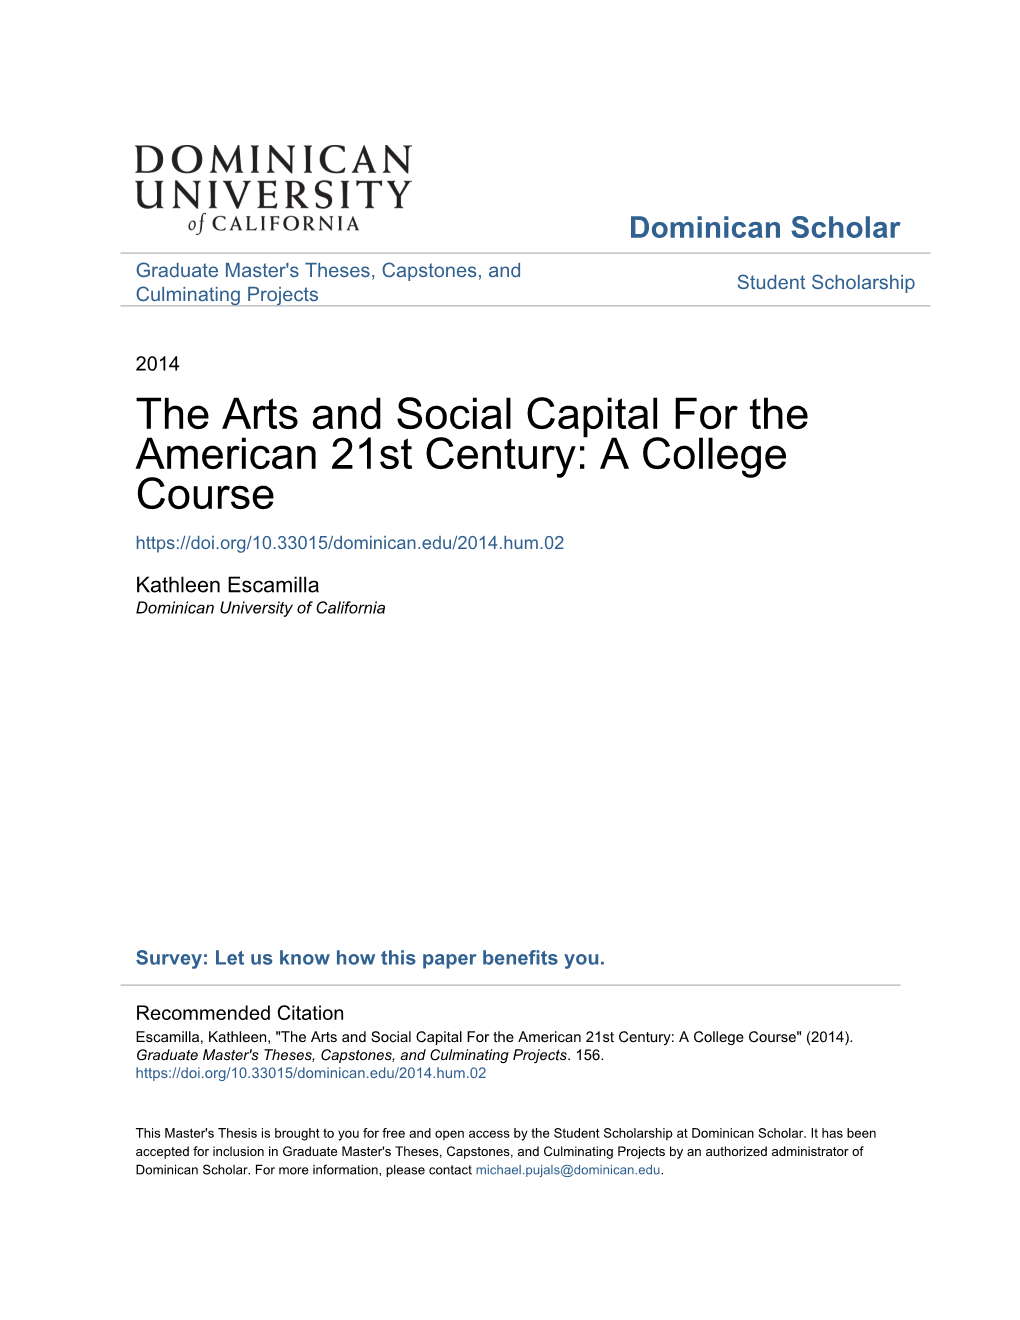 The Arts and Social Capital for the American 21St Century: a College Course